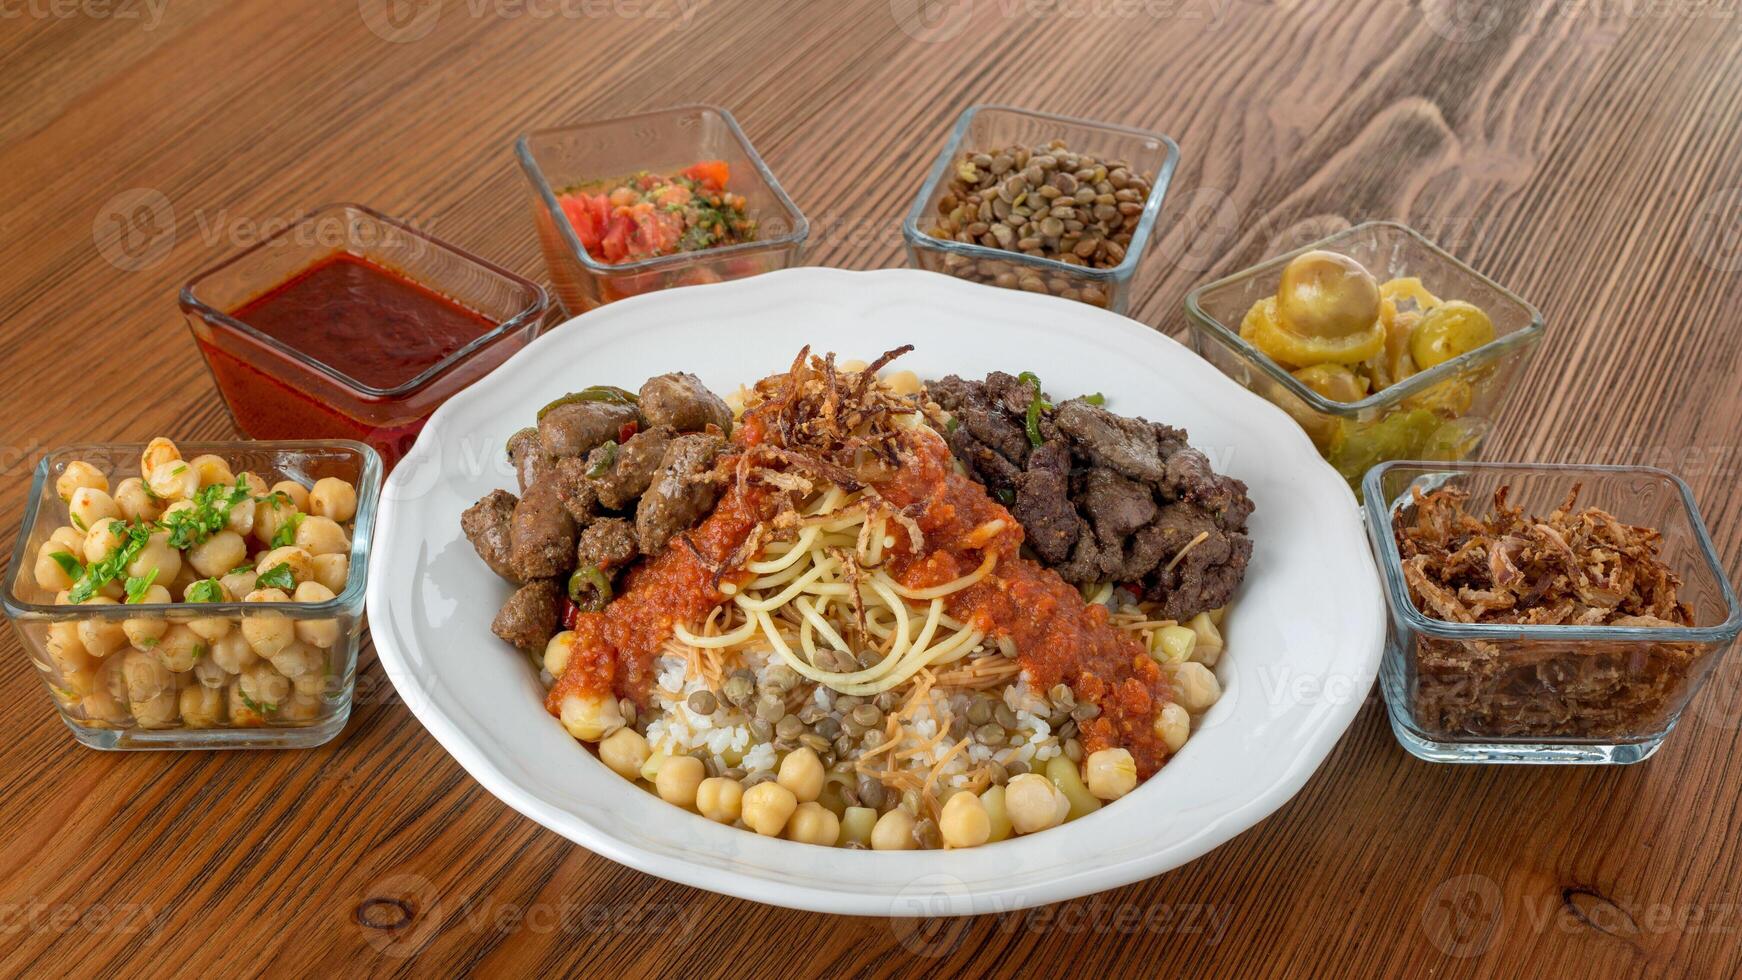 Koushari egyptian food with chicken liver and beef kebab, chickpea, noodles, boiled rice, lentil, fried onion, tomato, chili sauce and pickle served in dish isolated on table top view of arabic food photo